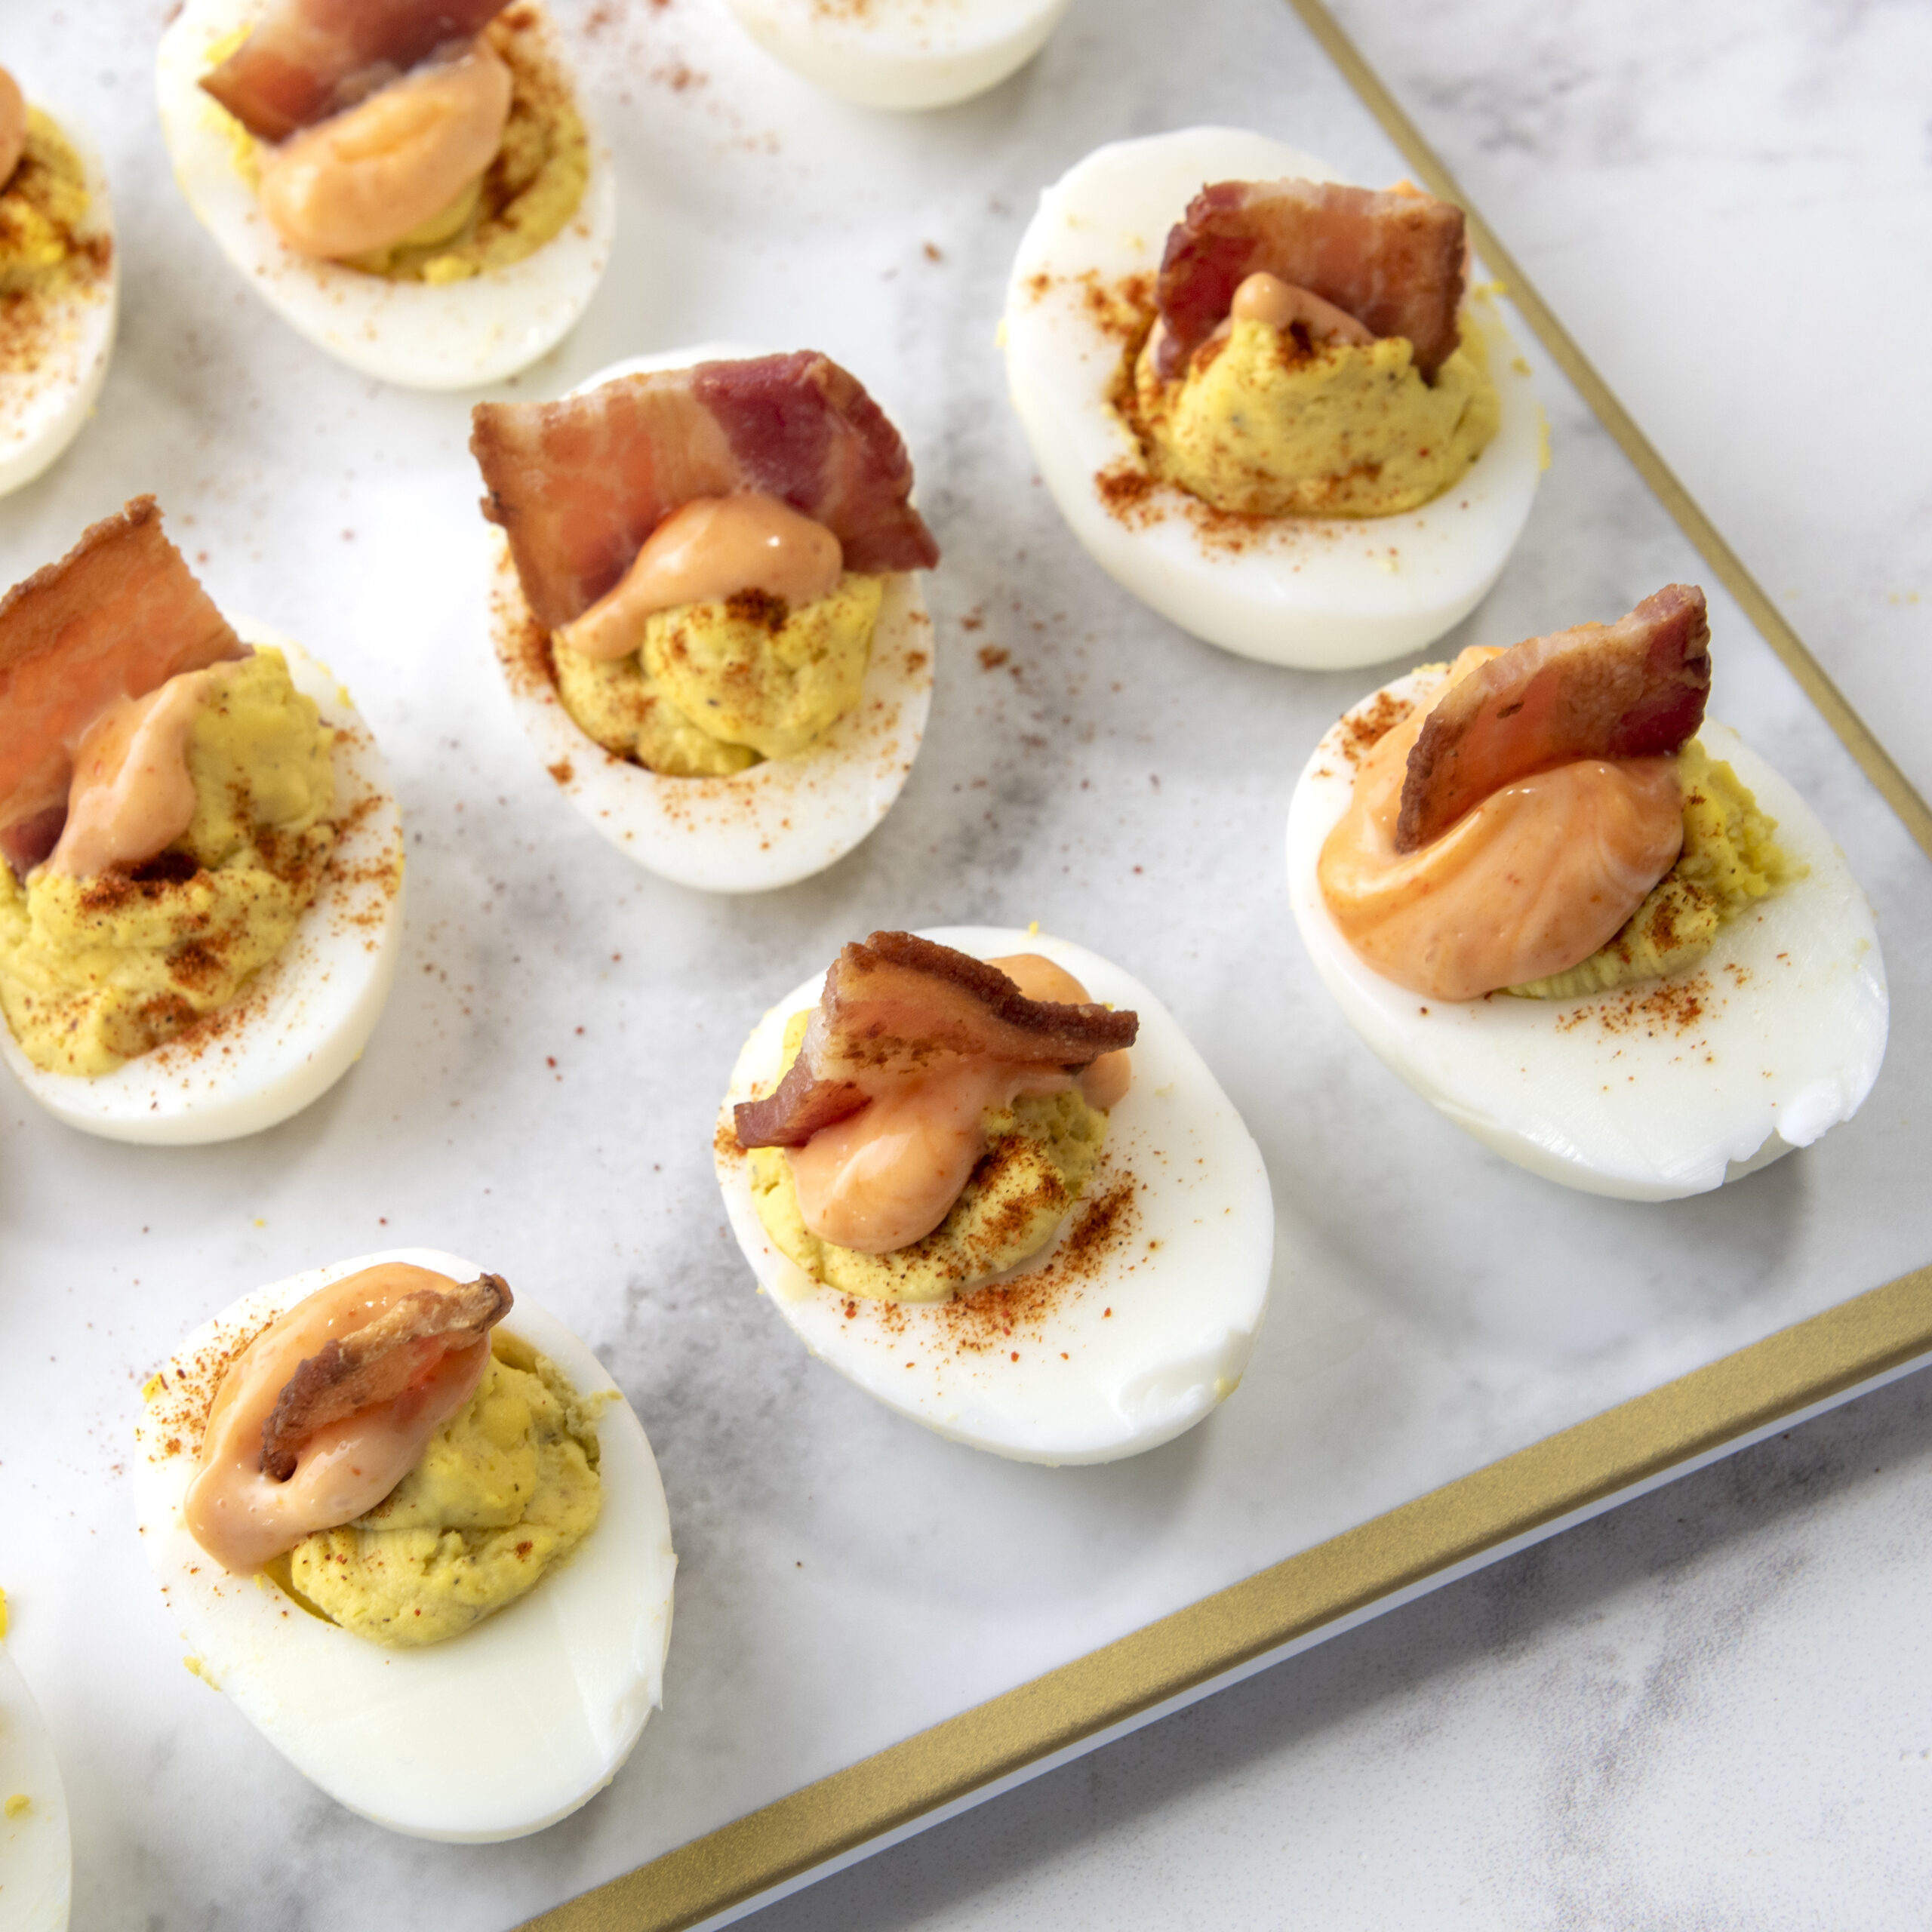 https://thinlicious.com/wp-content/uploads/2022/07/Best-Deviled-Eggs-With-Bacon-29-SQ-scaled.jpg